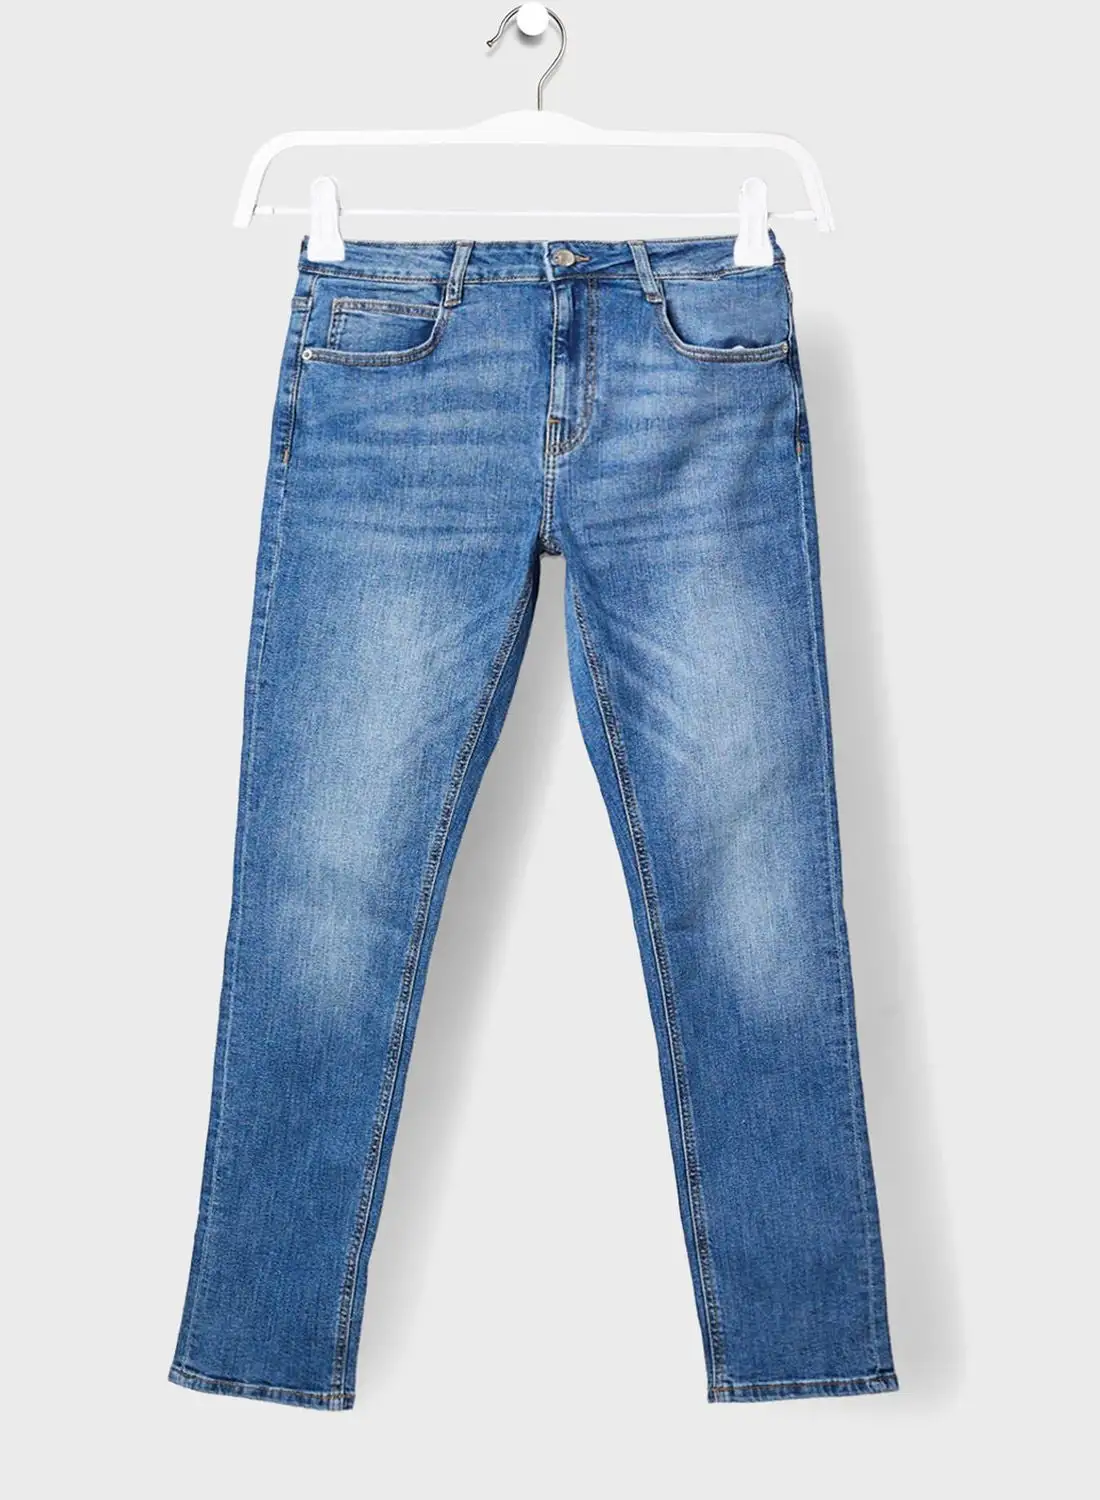 MANGO Youth Skinny Fit Jeans